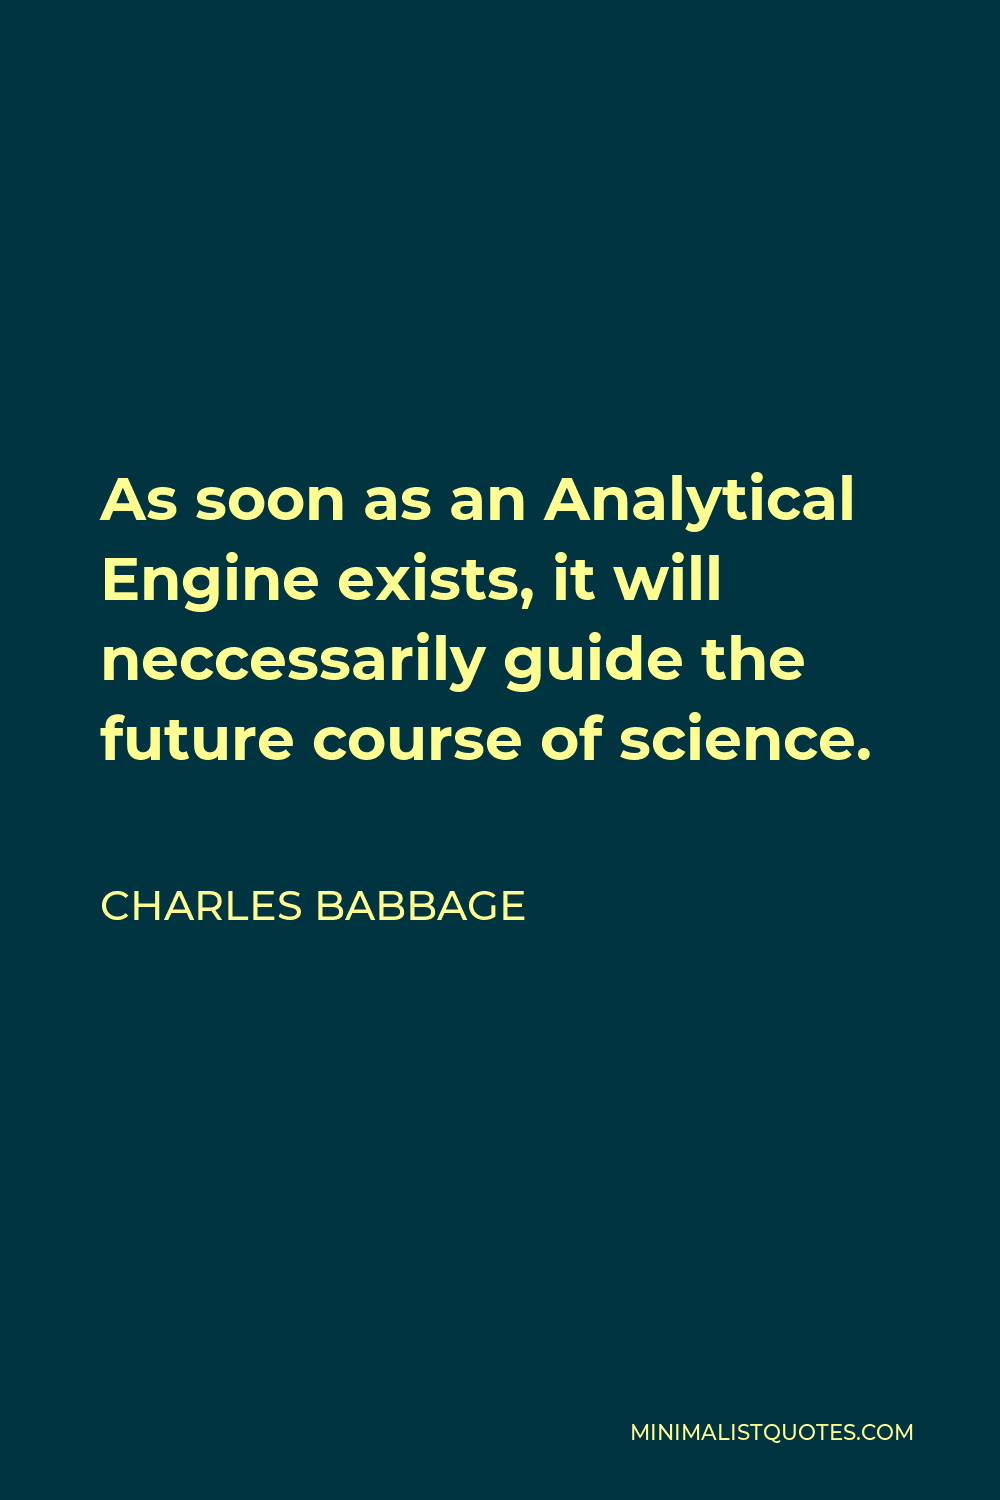 Charles Babbage Quote - As soon as an Analytical Engine exists, it will neccessarily guide the future course of science.